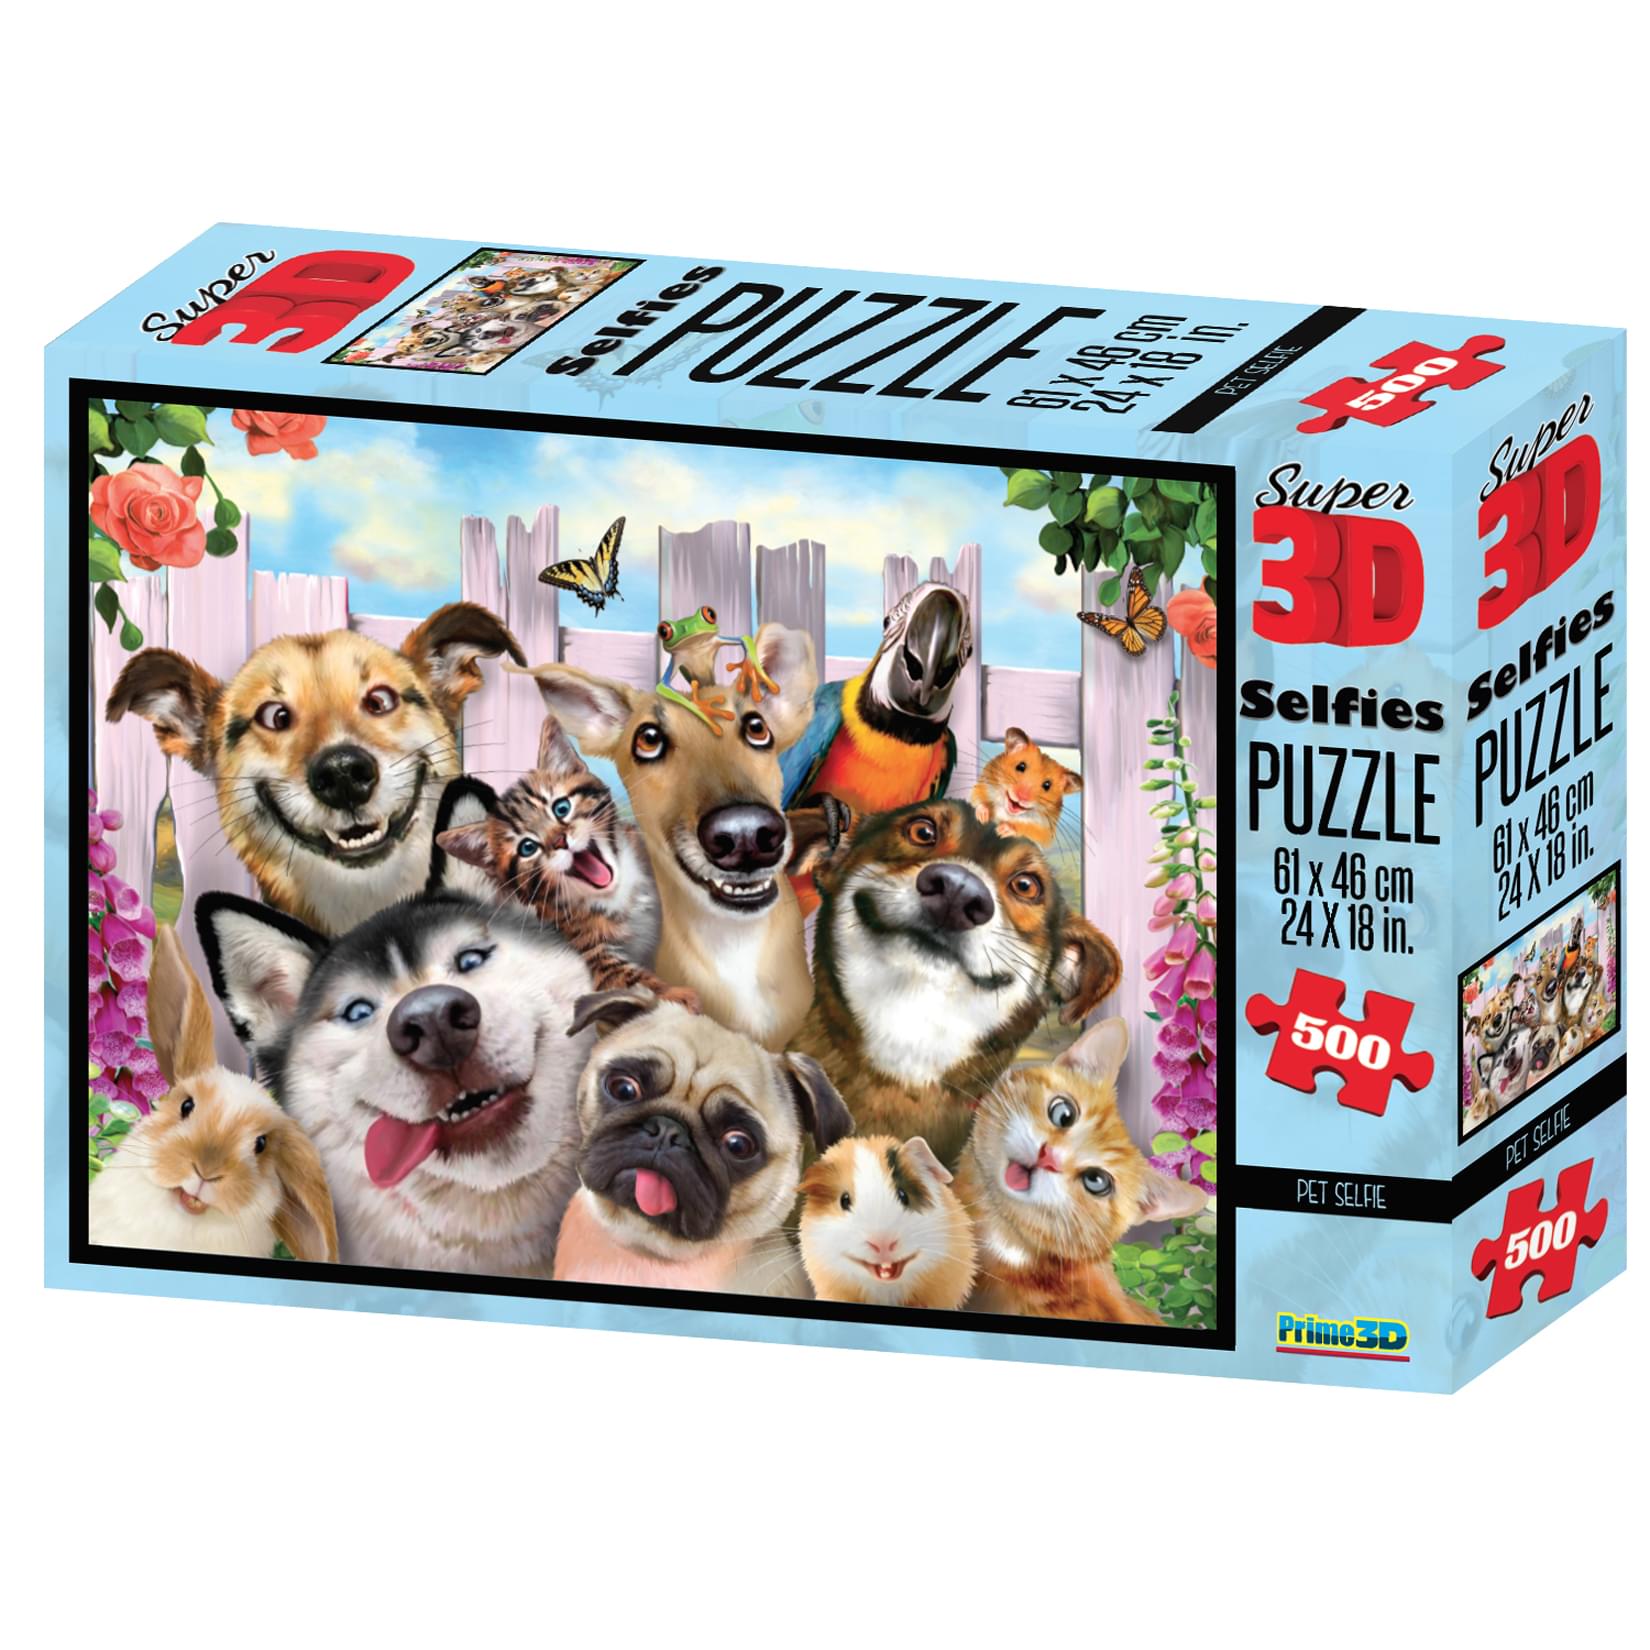 Howard Robinson Pet Selfie Super 3D 500 Piece Jigsaw Puzzle For Adults And Kids